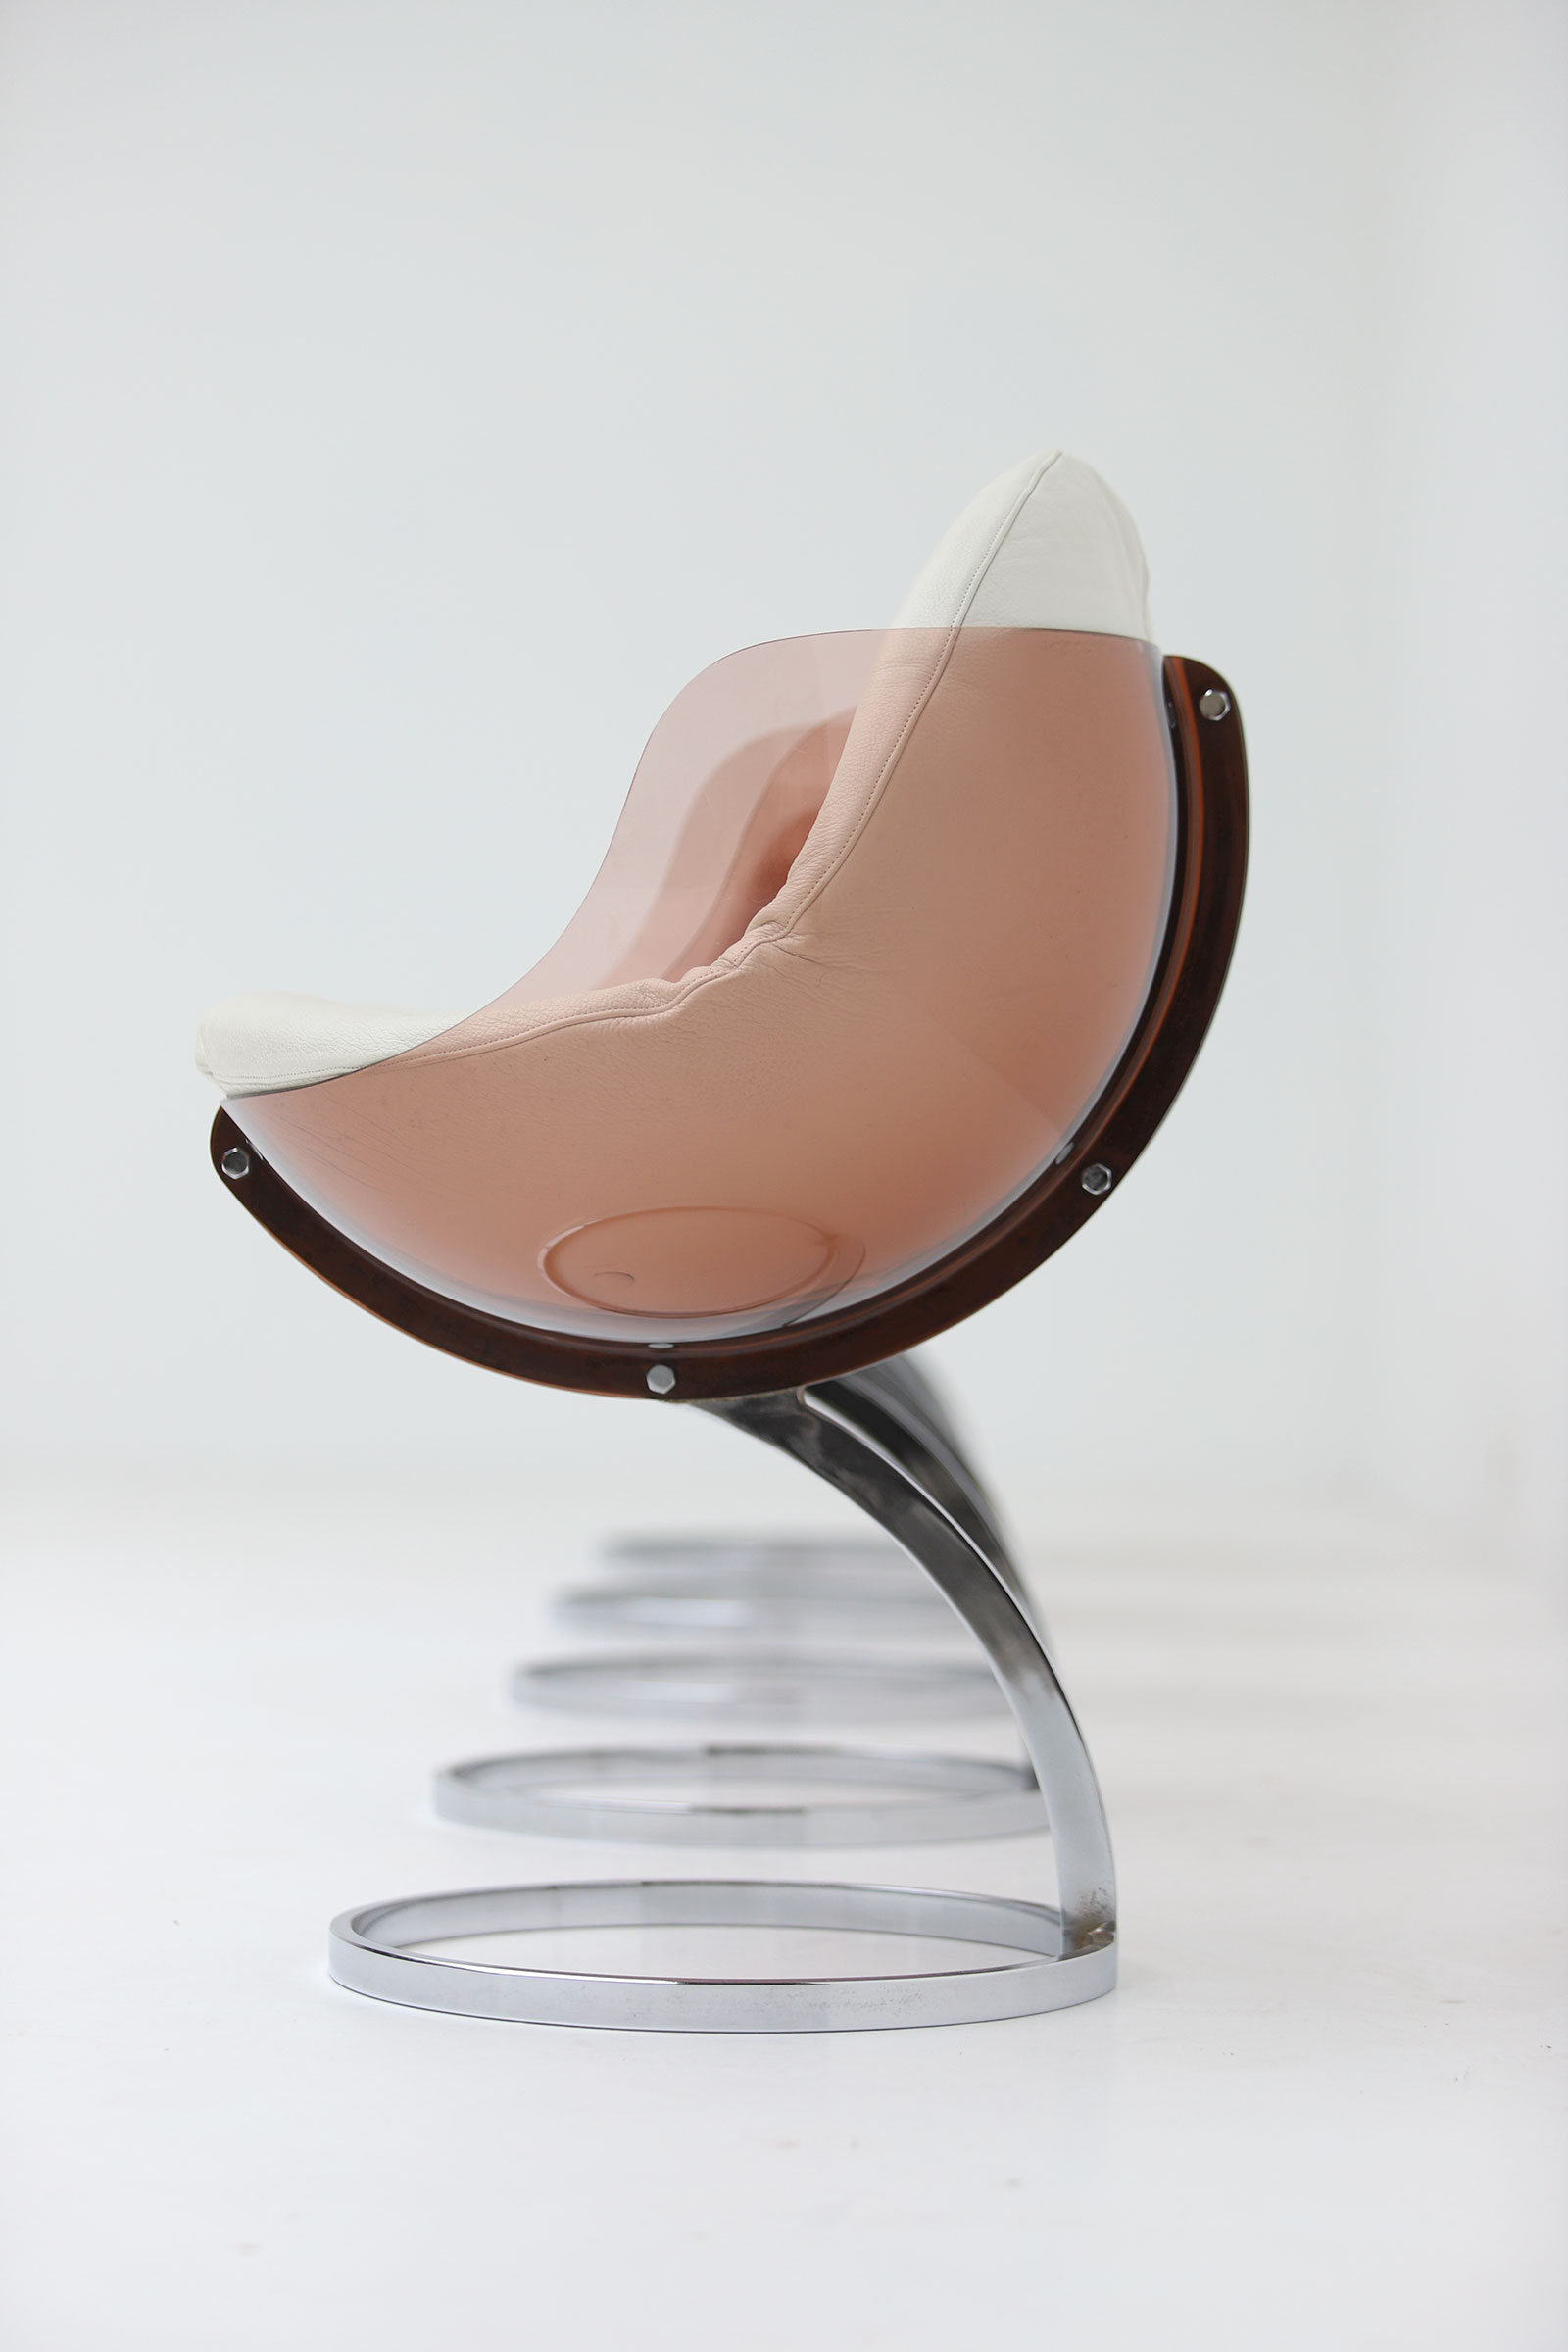 Sphere chair designed by Boris Tabacoffimage 7